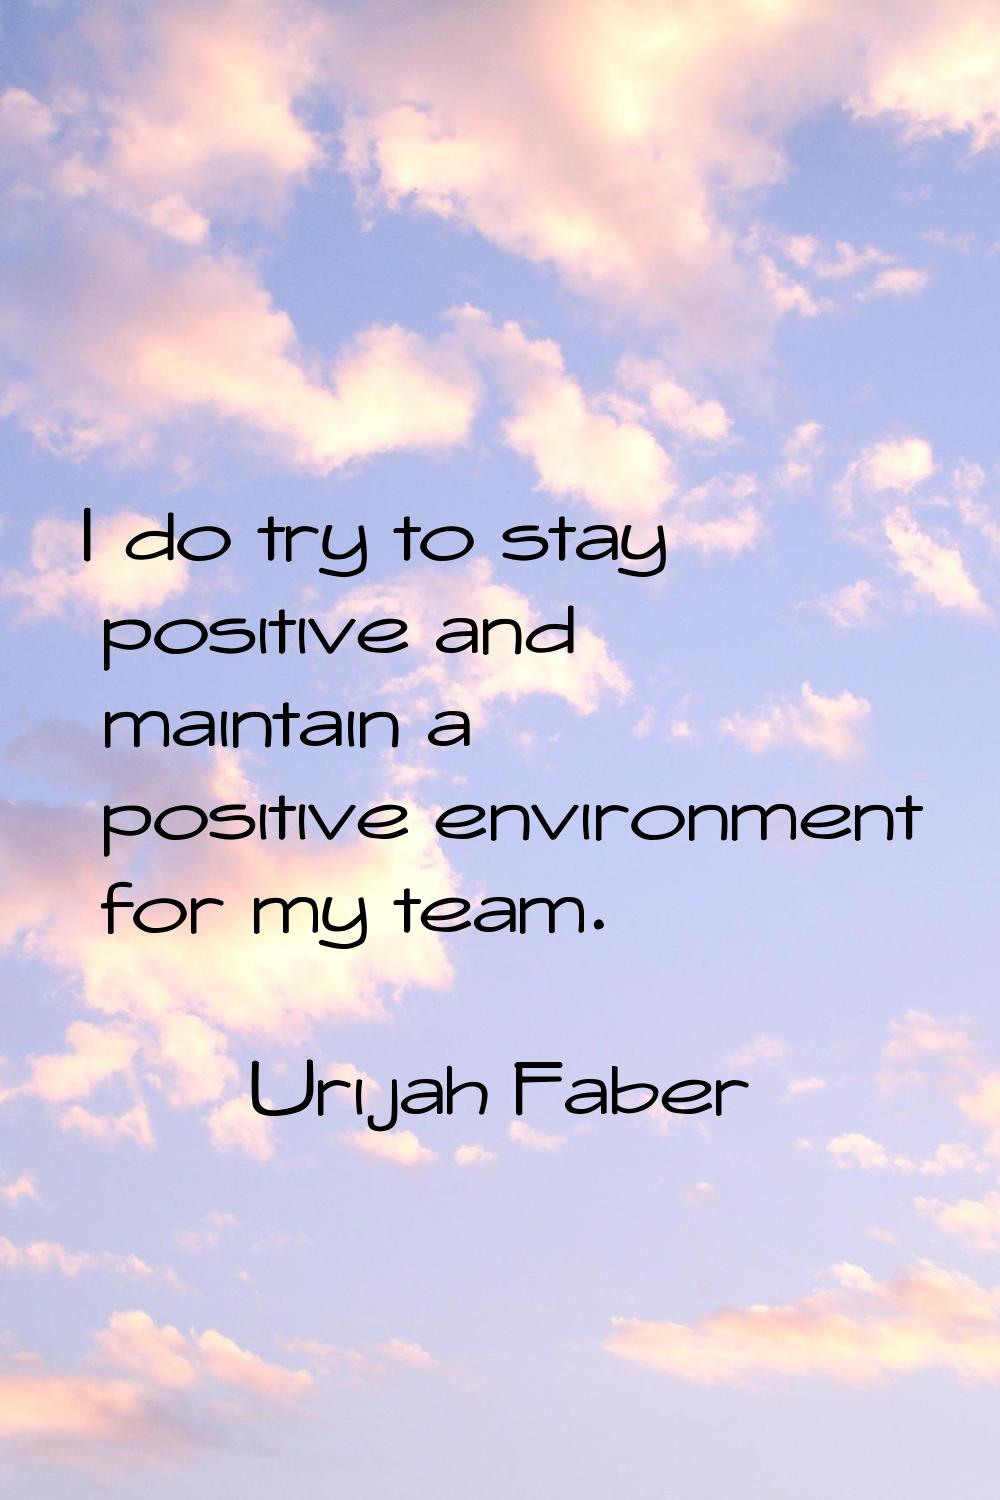 I do try to stay positive and maintain a positive environment for my team.